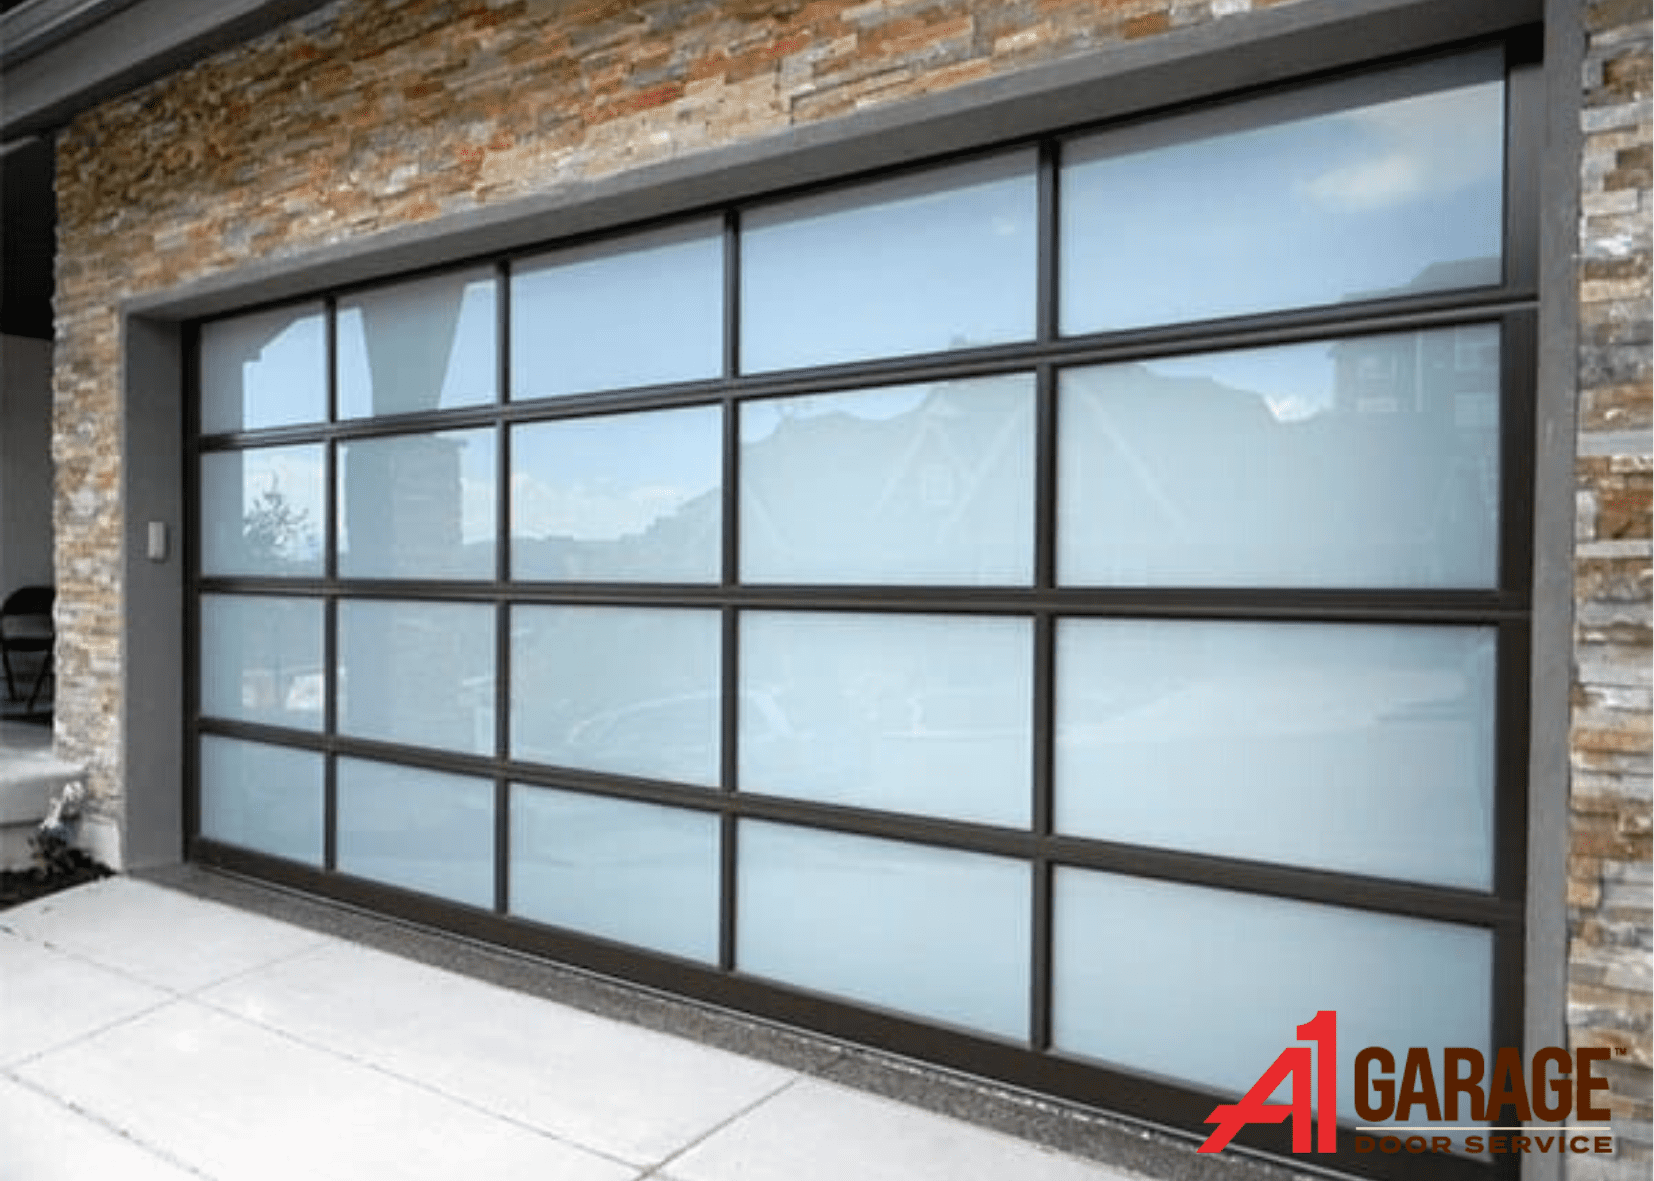 Can I install a garage door with a glass top panel?